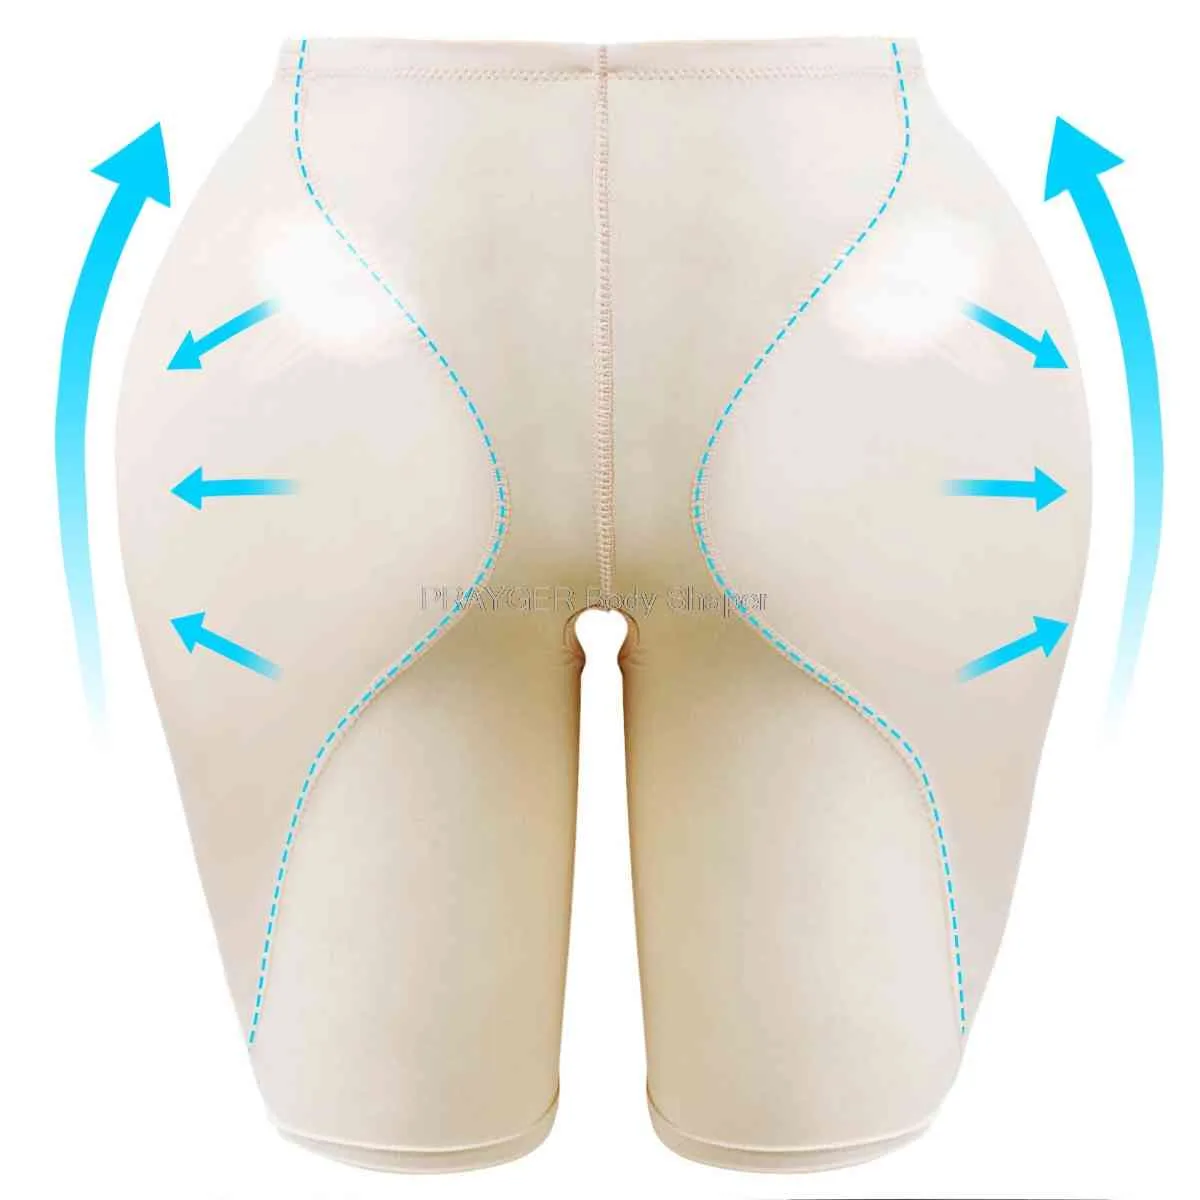 Hommes Plus S-6xl Enhancer Sexy Tamim Control Pantes Lifter Corps Shaper Souswear Hip Fake Buttocks